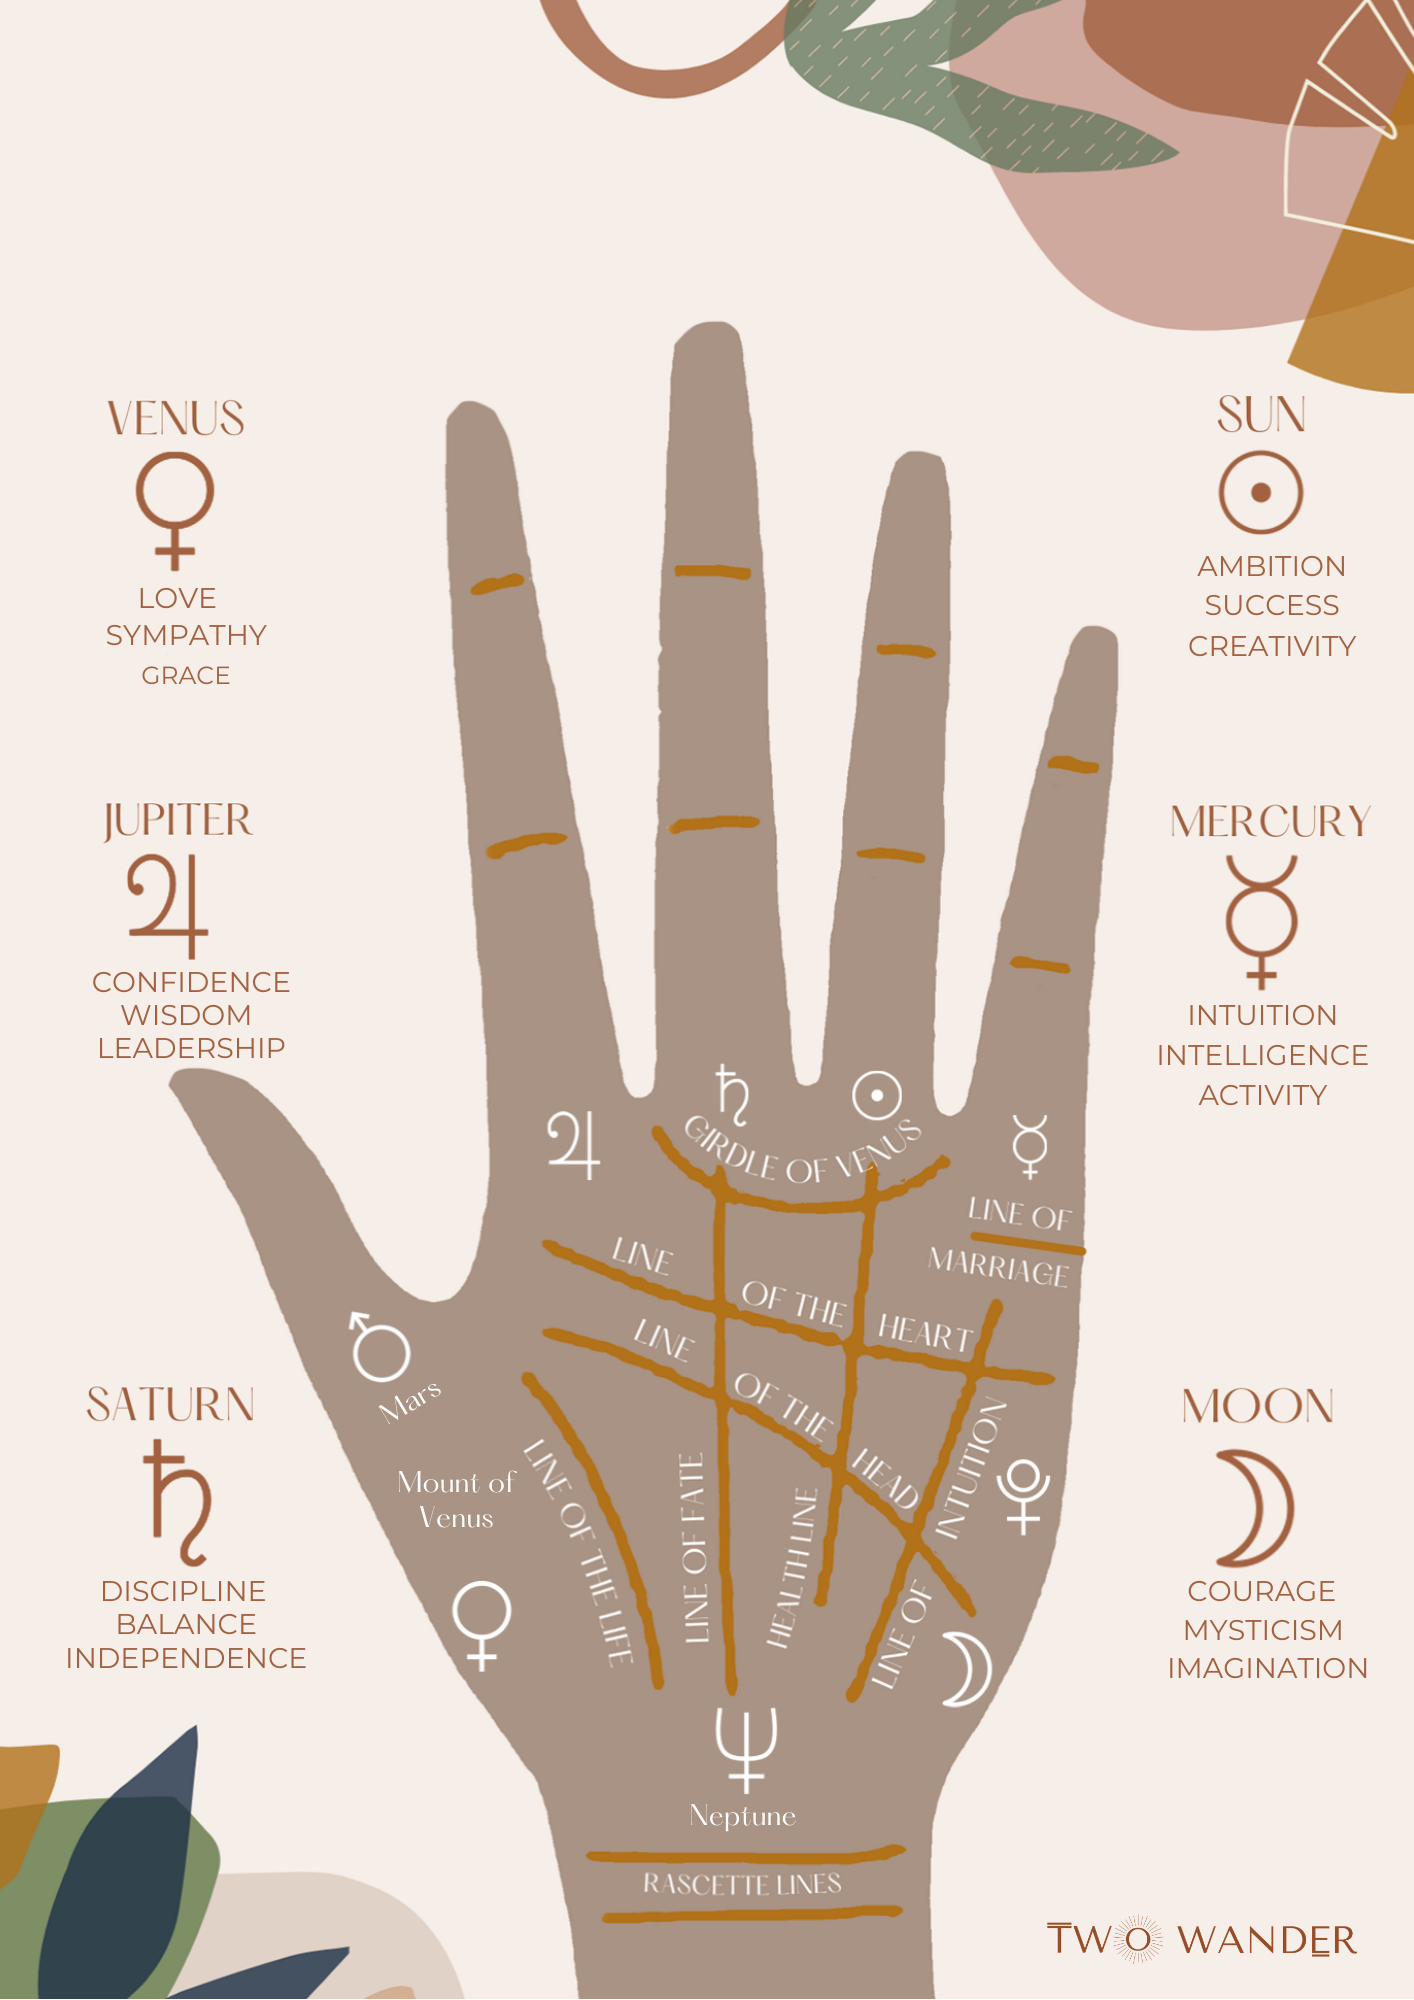 Sun (Apollo) Line - Fame, Luck and Wealth - Palmistry